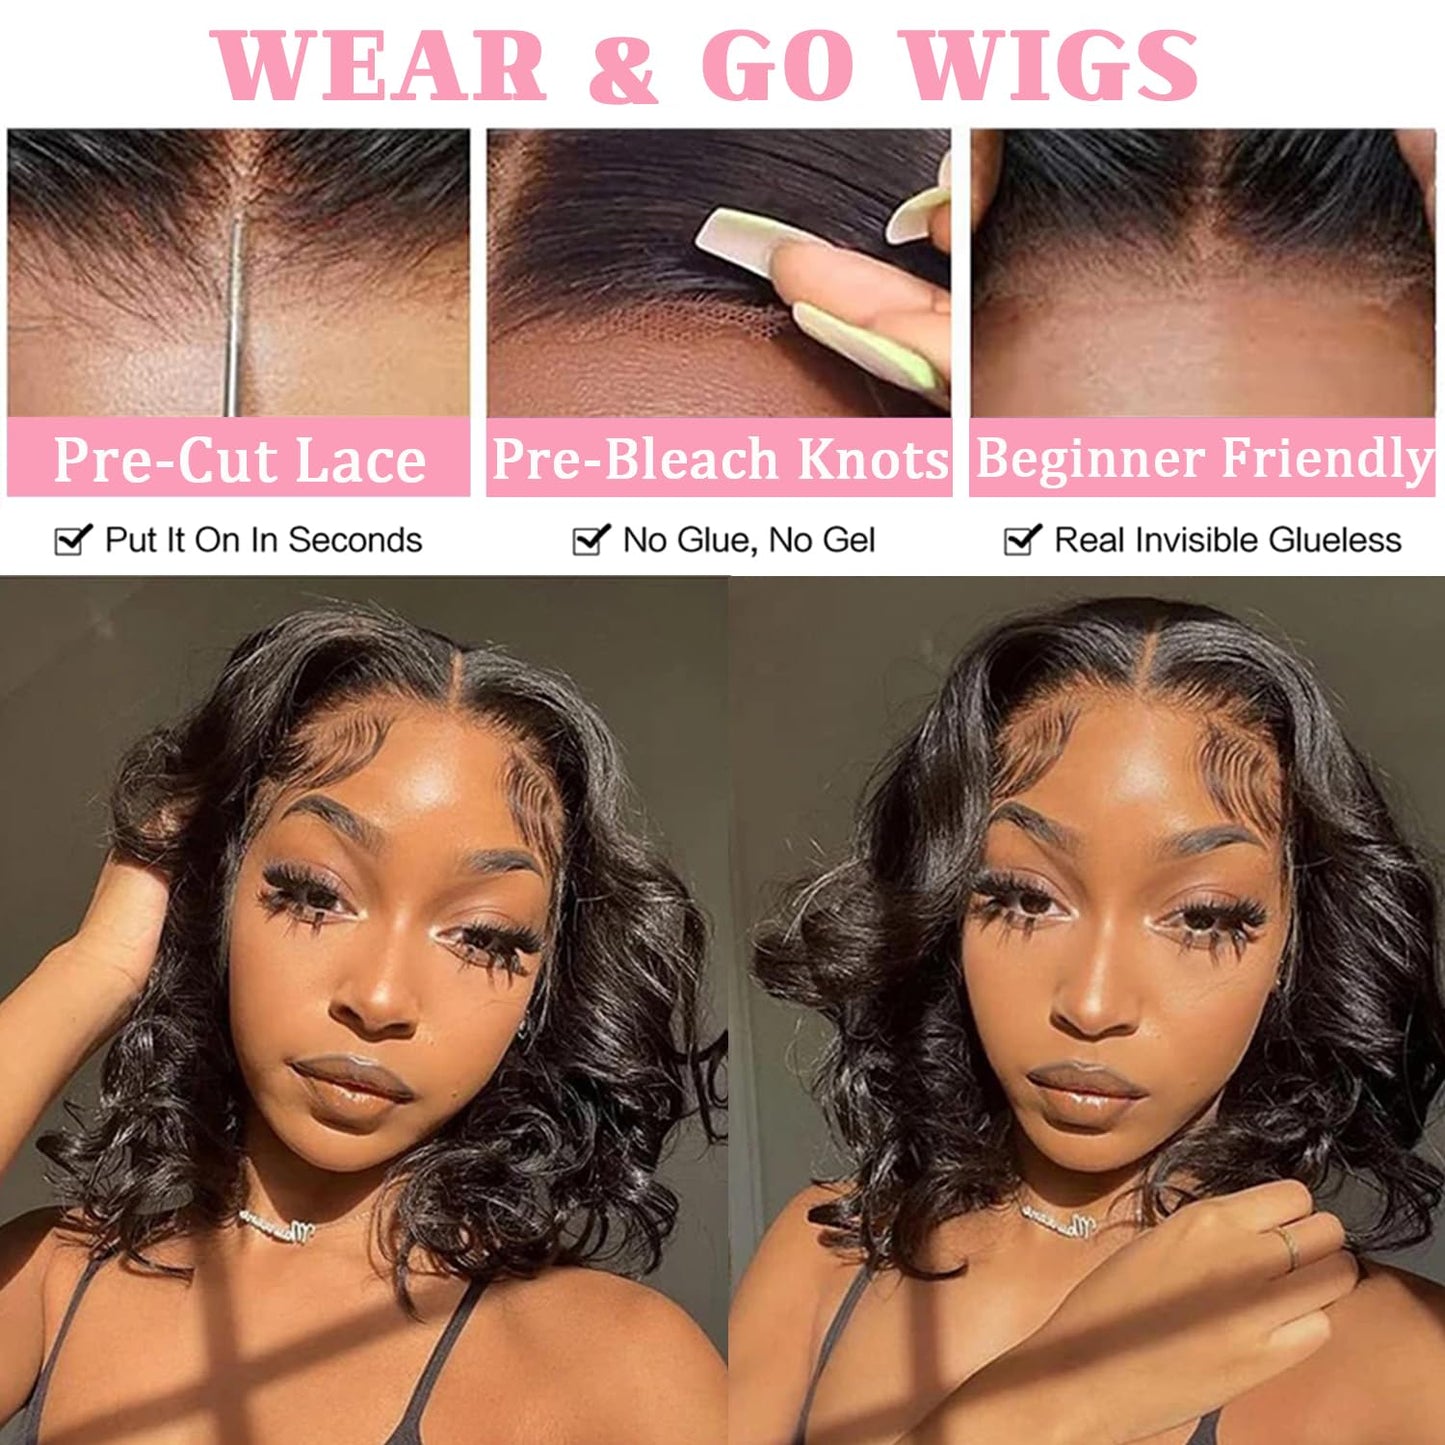 Skouty 14 Inch Glueless Wigs Human Hair Pre Plucked Bob Wig Human Hair for Black Women Wear and Go Body Wave Lace Front Wigs Upgraded No Glue Needed Pre Cut 4x4 Lace Closure Wigs for Beginners